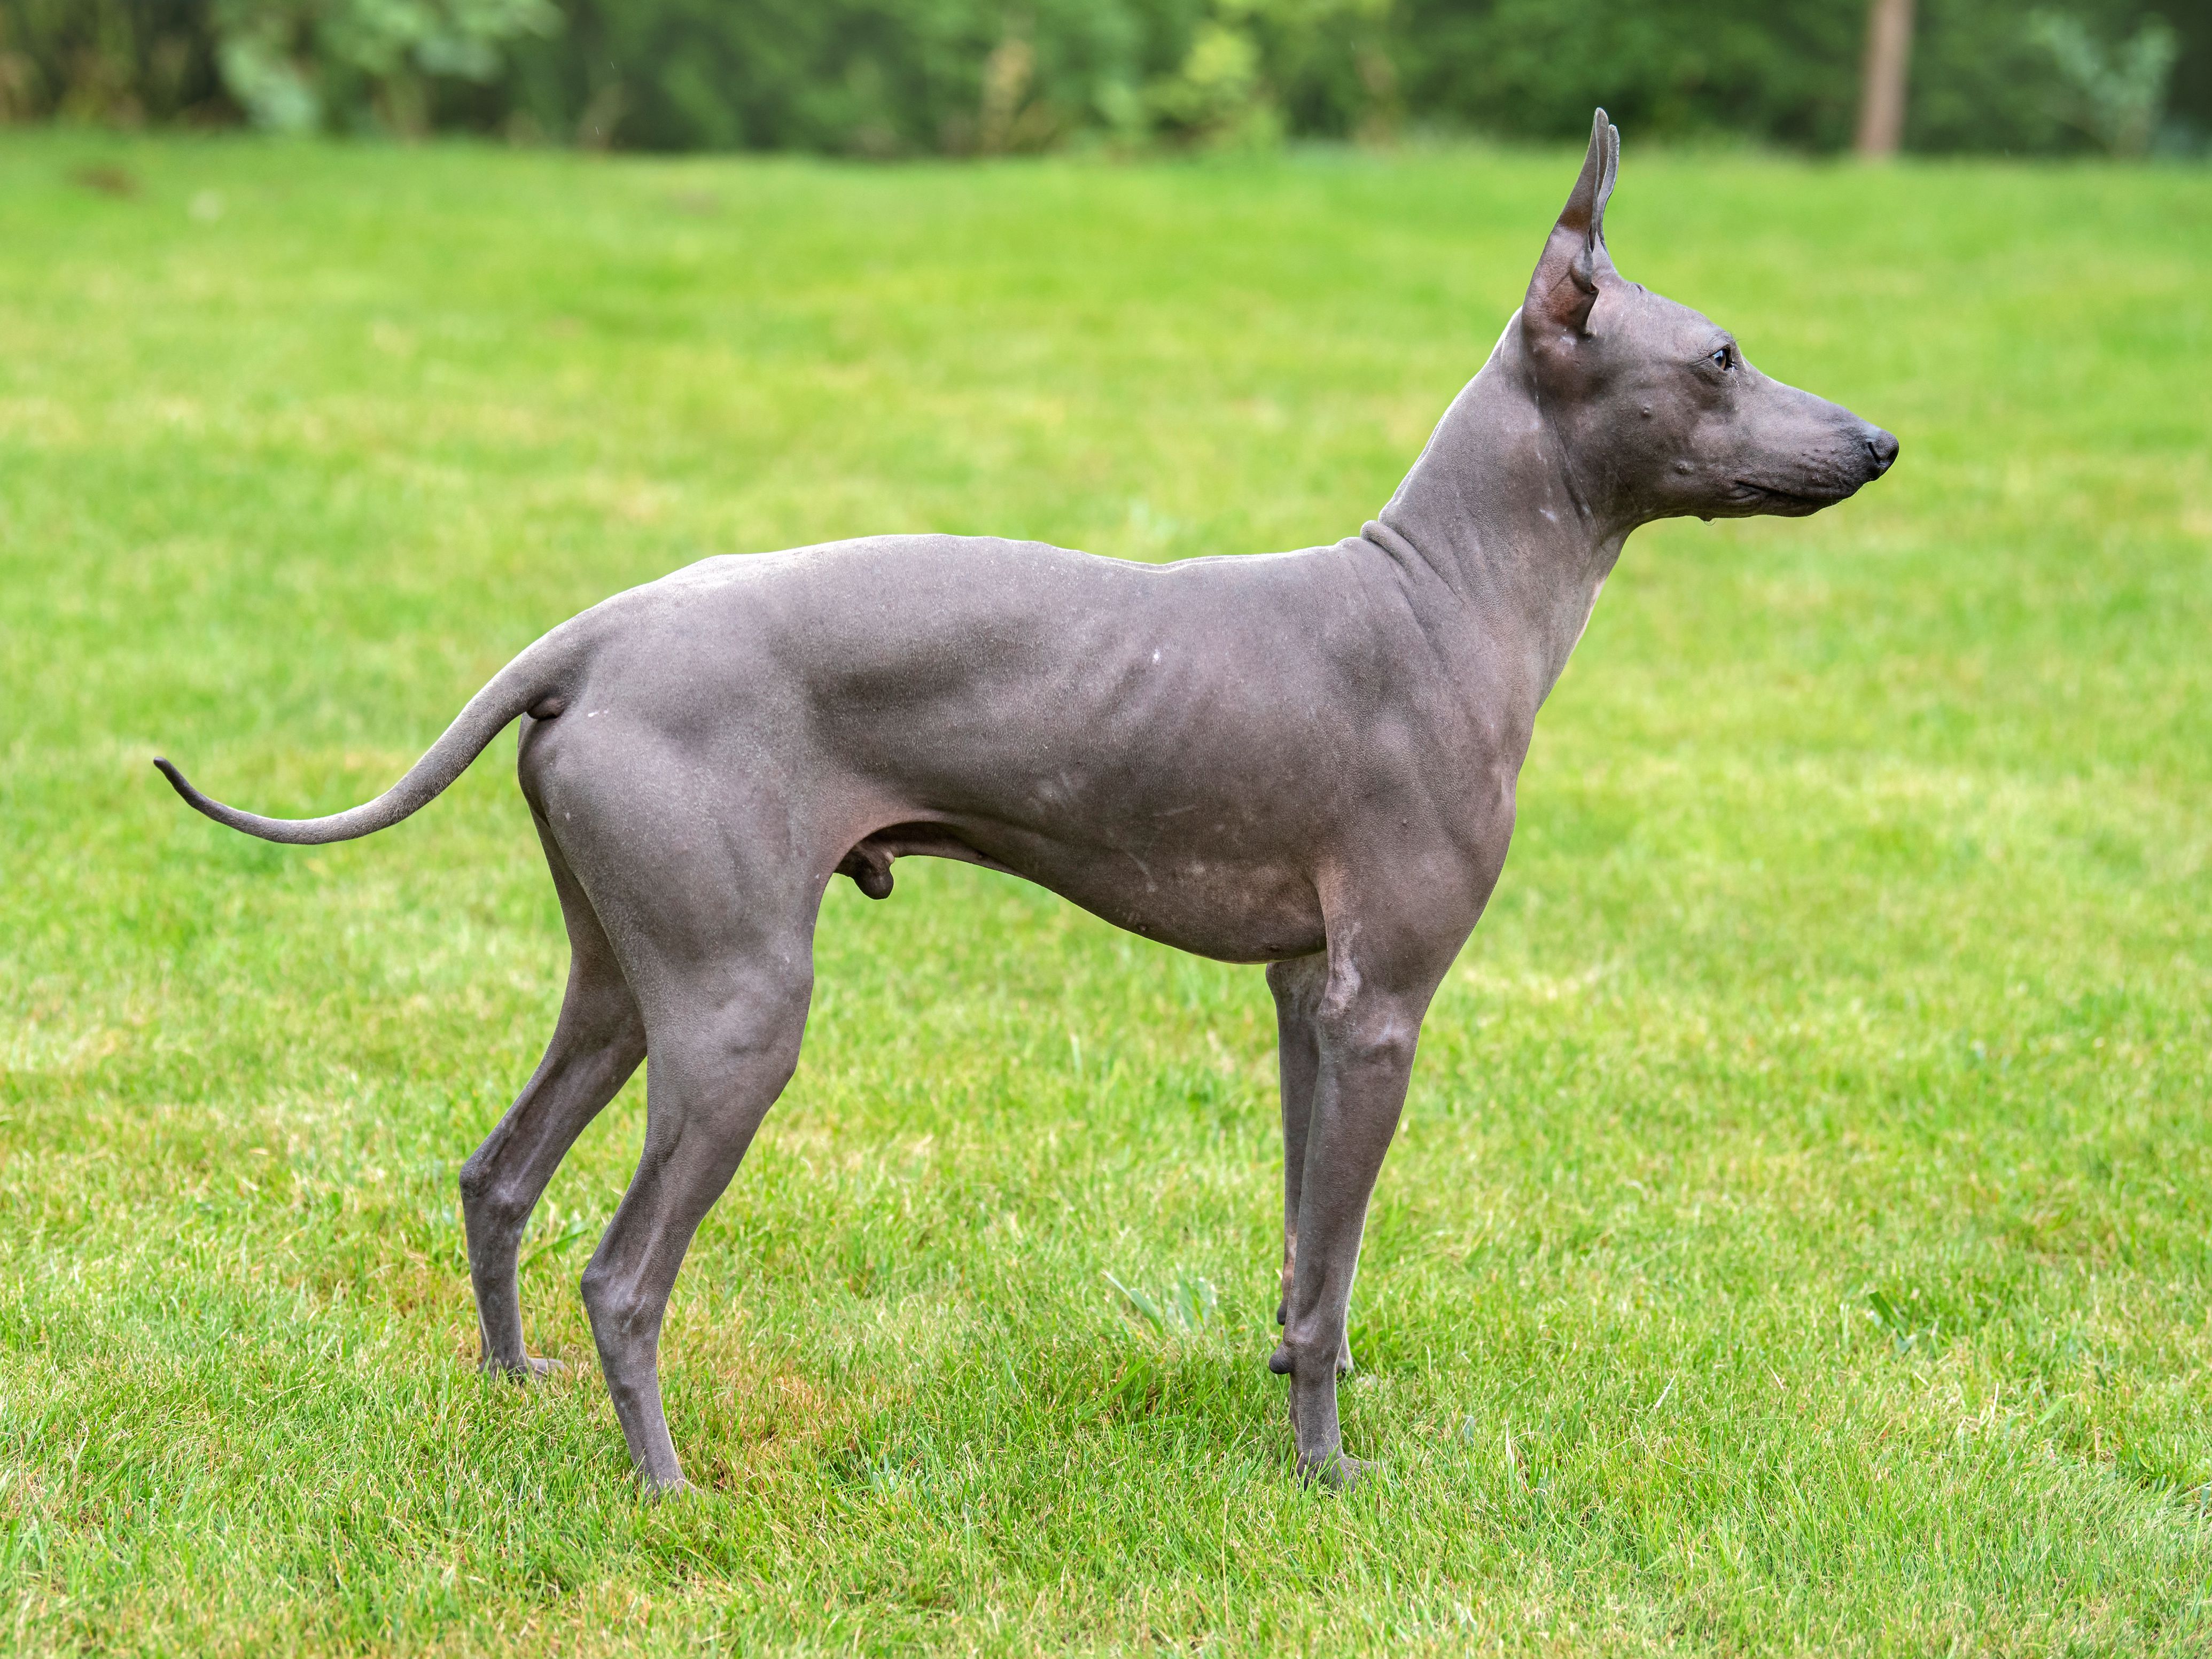 Which dog breed has no hair?